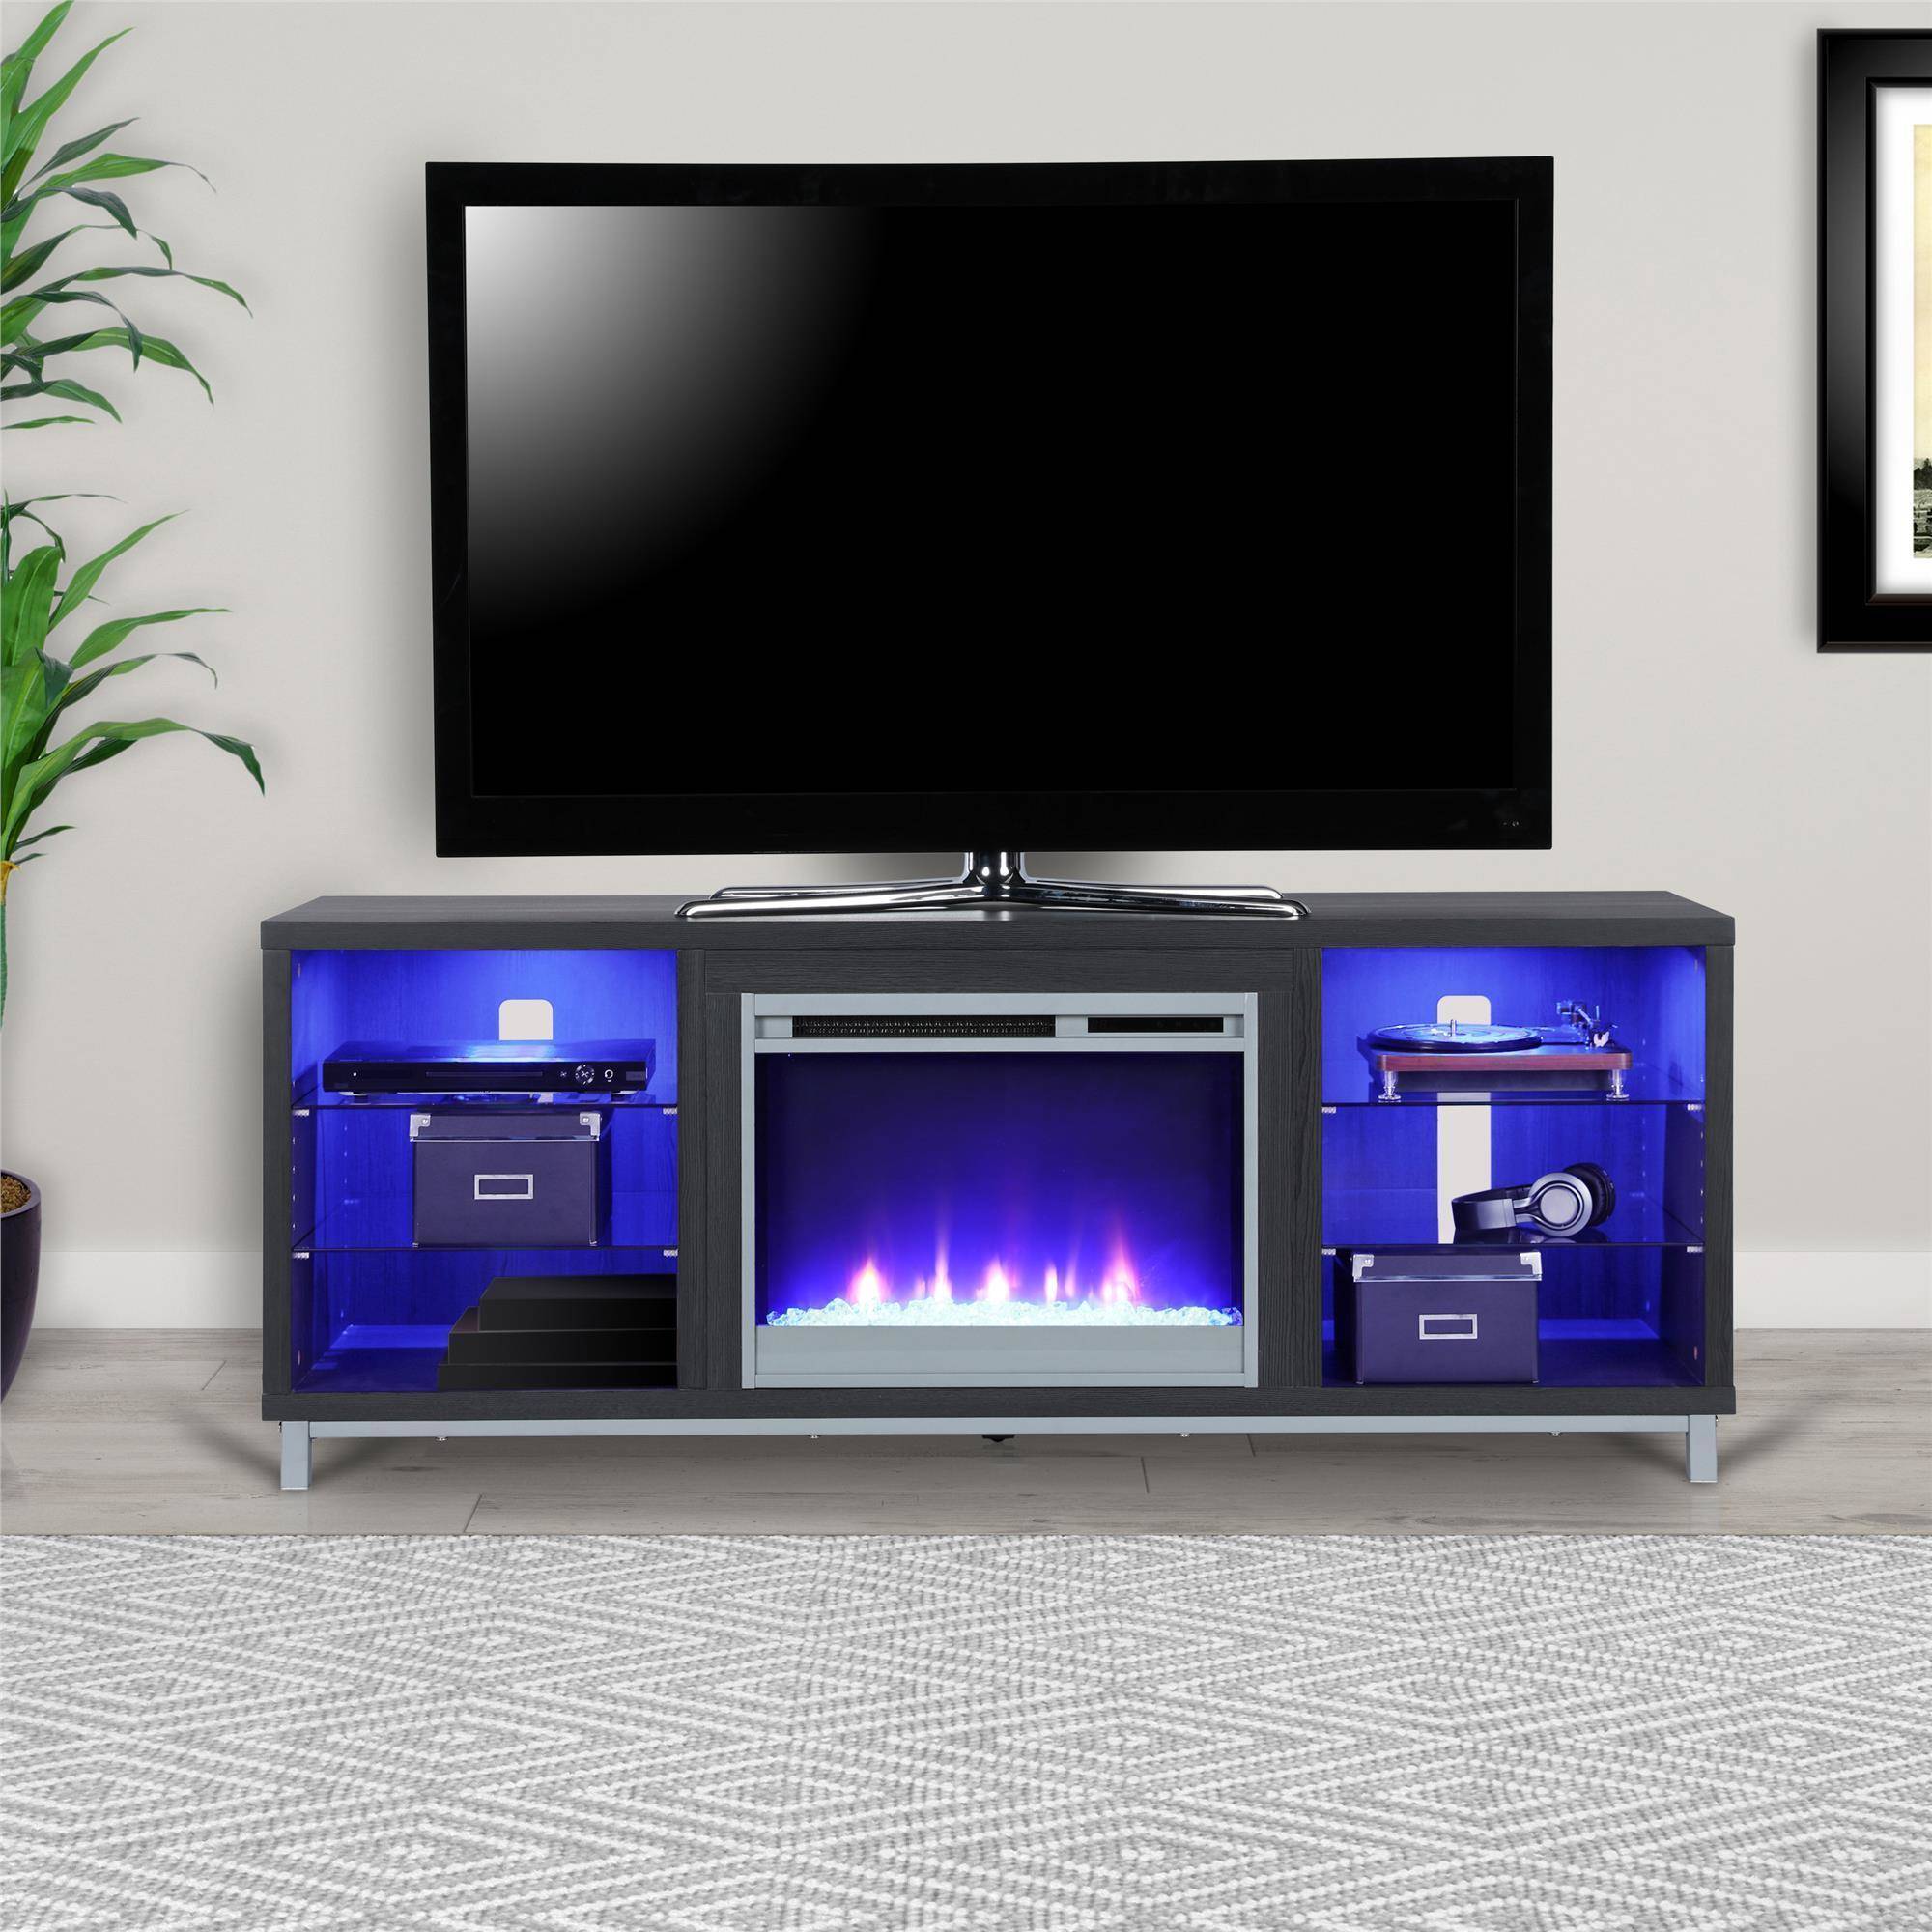 Fireplace Tv Stand Barn Door Unique Ameriwood Home Lumina Fireplace Tv Stand for Tvs Up to 70" Wide Black Oak Walmart